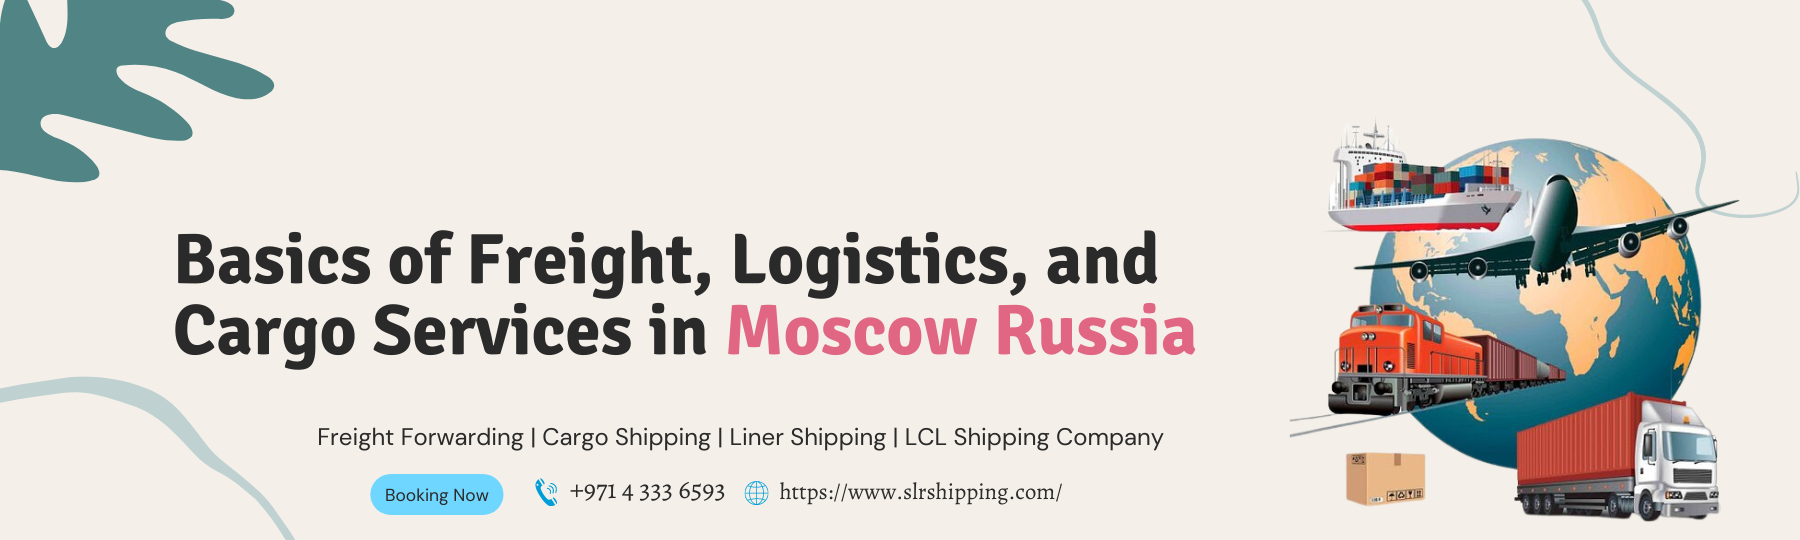 Basics of Freight, Logistics, and Cargo Services